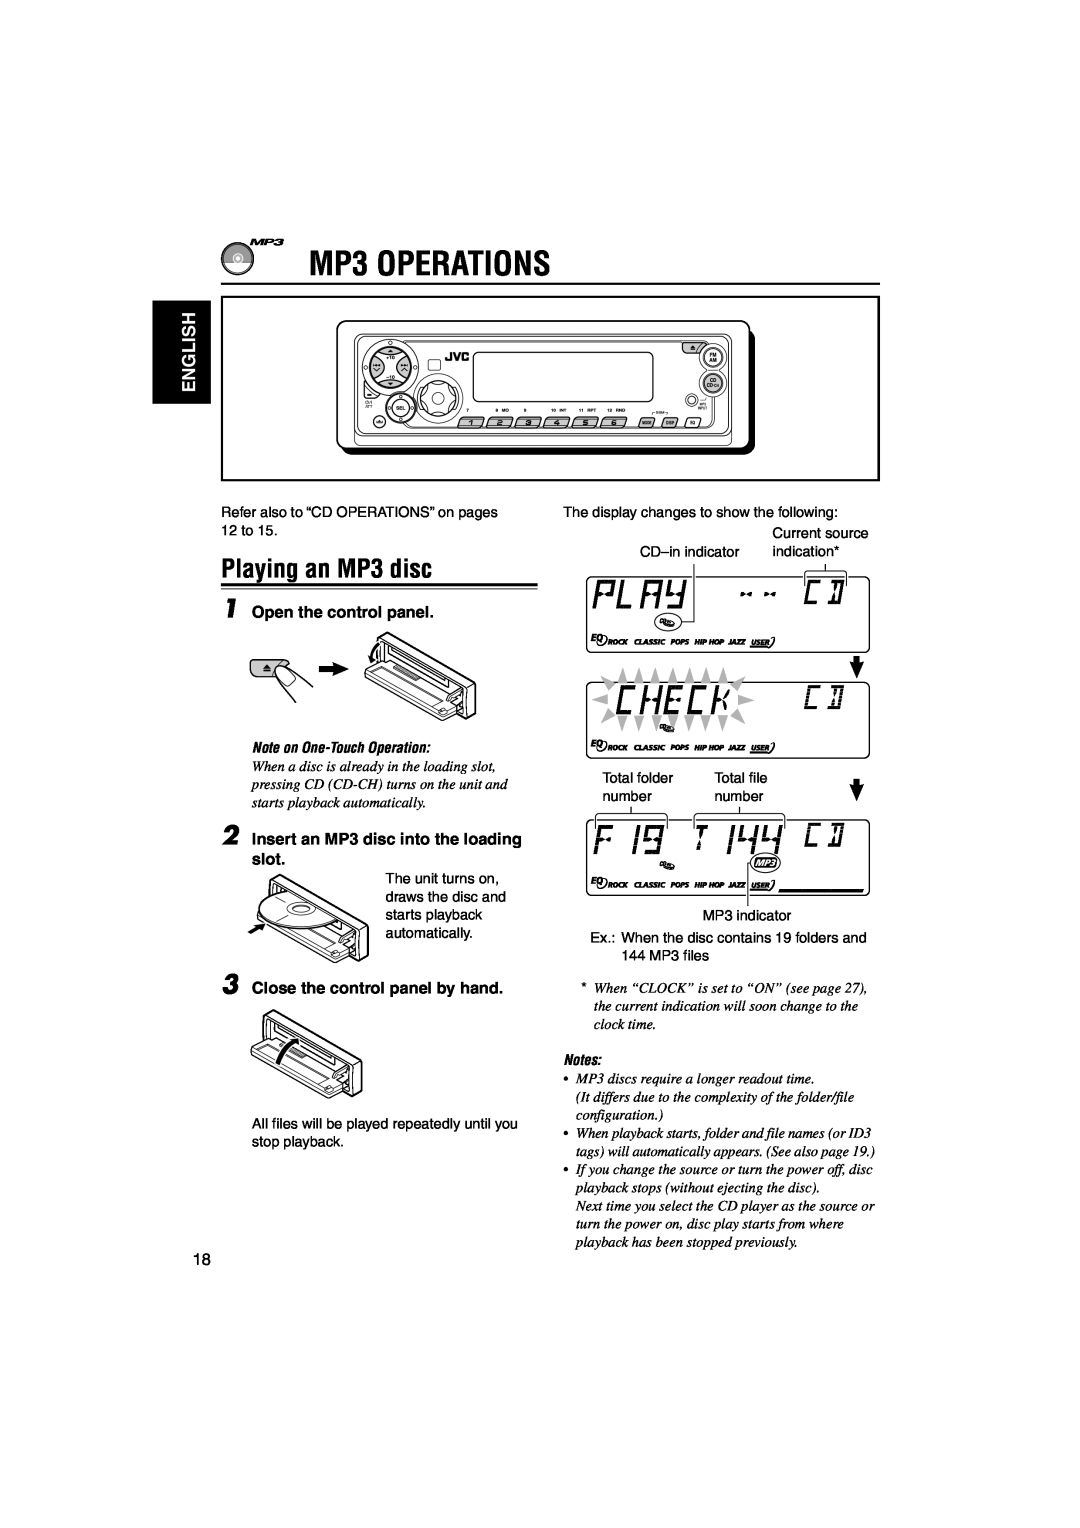 JVC KD-SX9350 manual MP3 OPERATIONS, Playing an MP3 disc, English, Open the control panel, Close the control panel by hand 